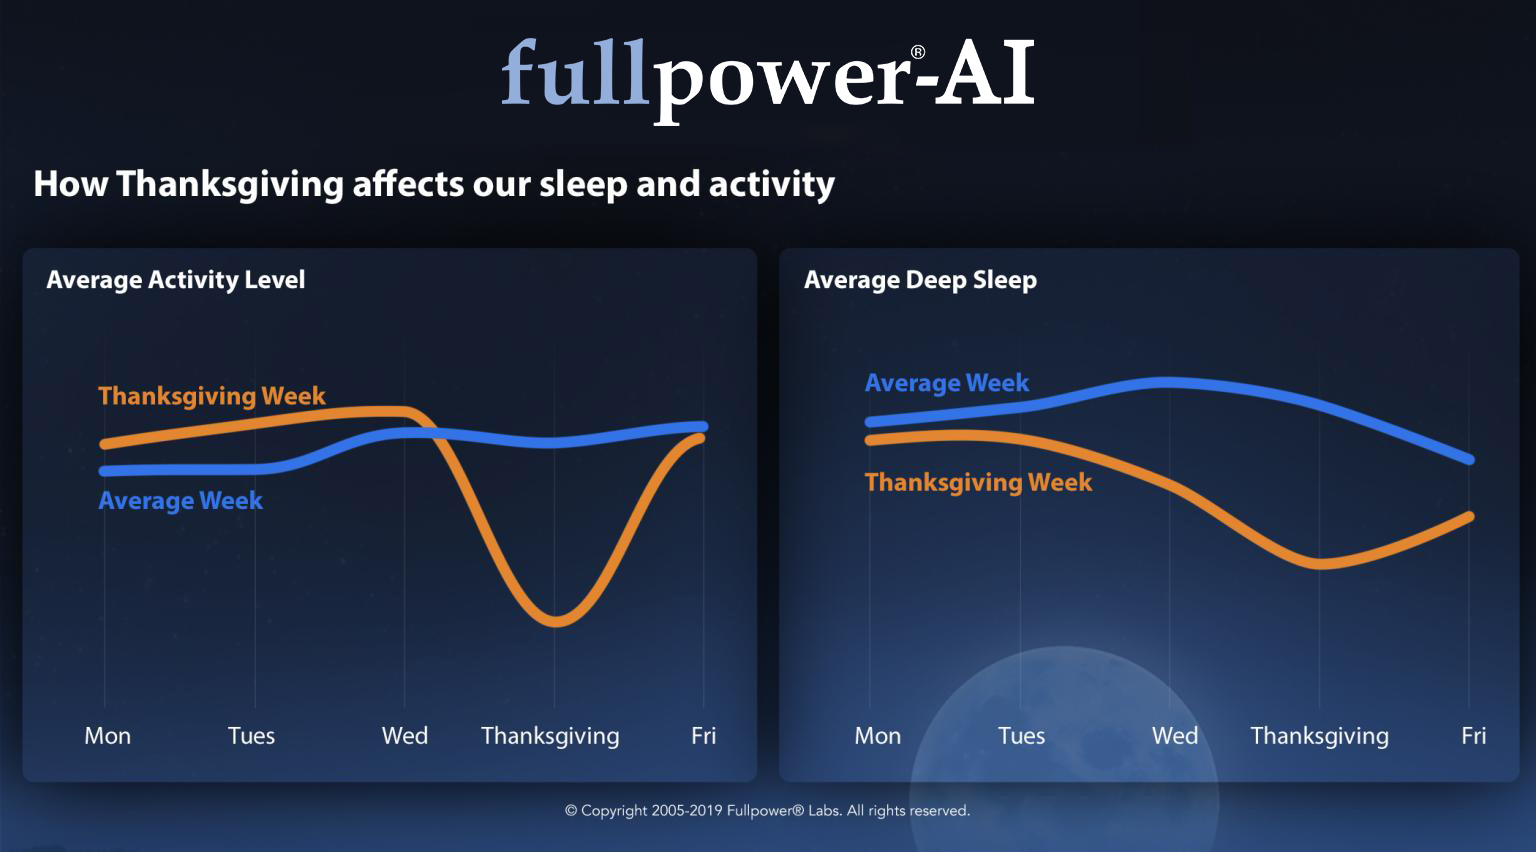 How Thanksgiving affects our sleep and activity